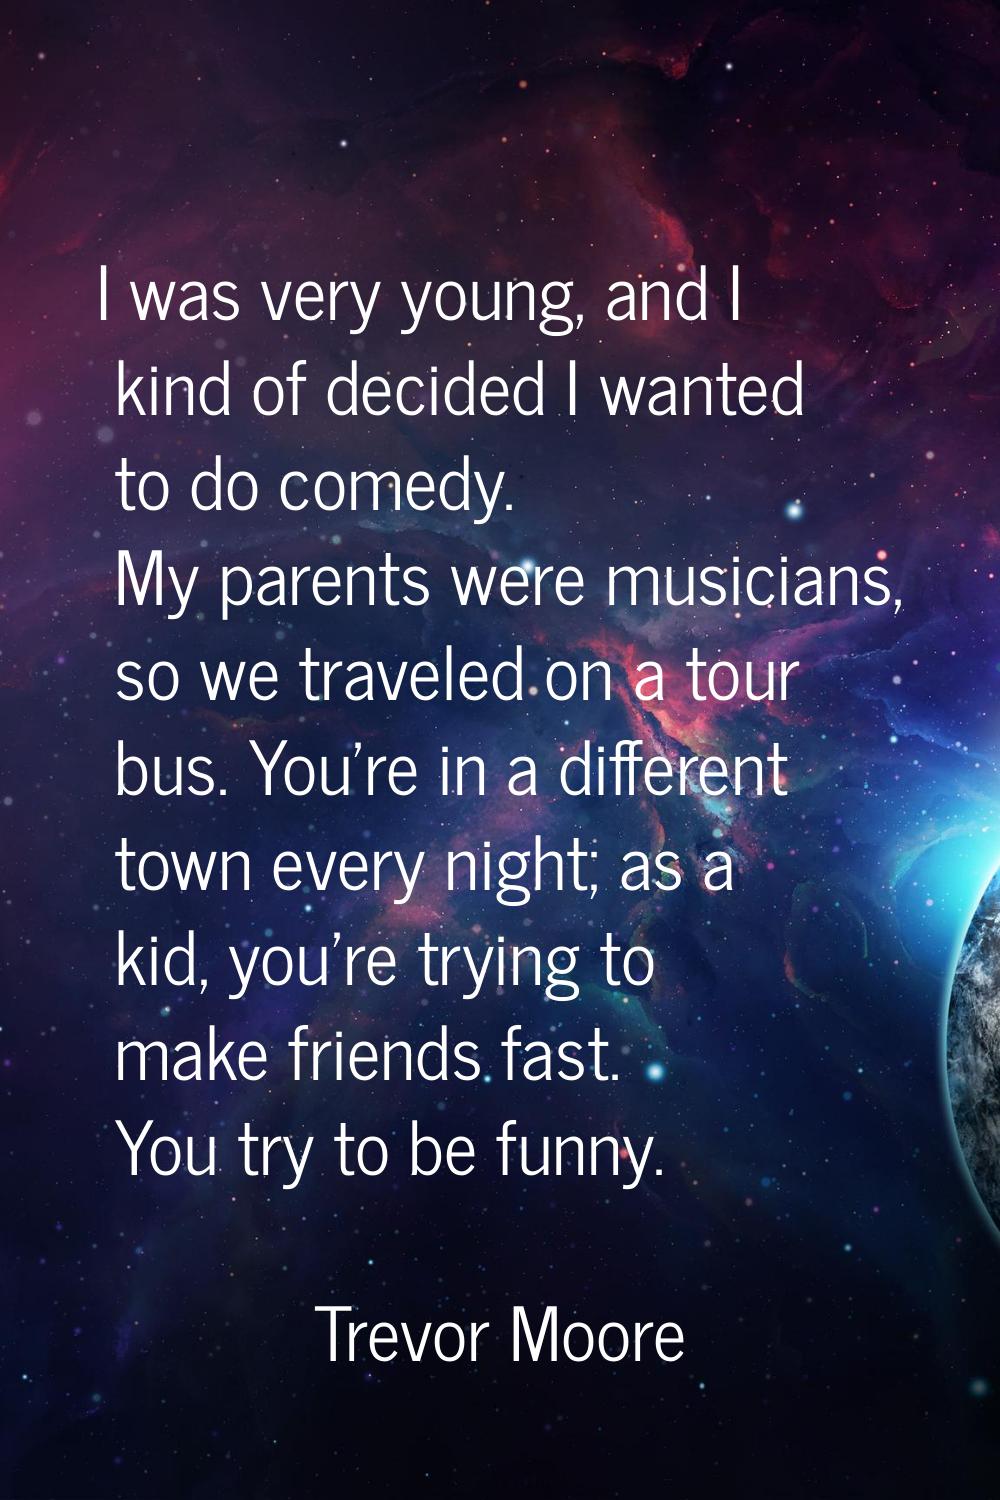 I was very young, and I kind of decided I wanted to do comedy. My parents were musicians, so we tra